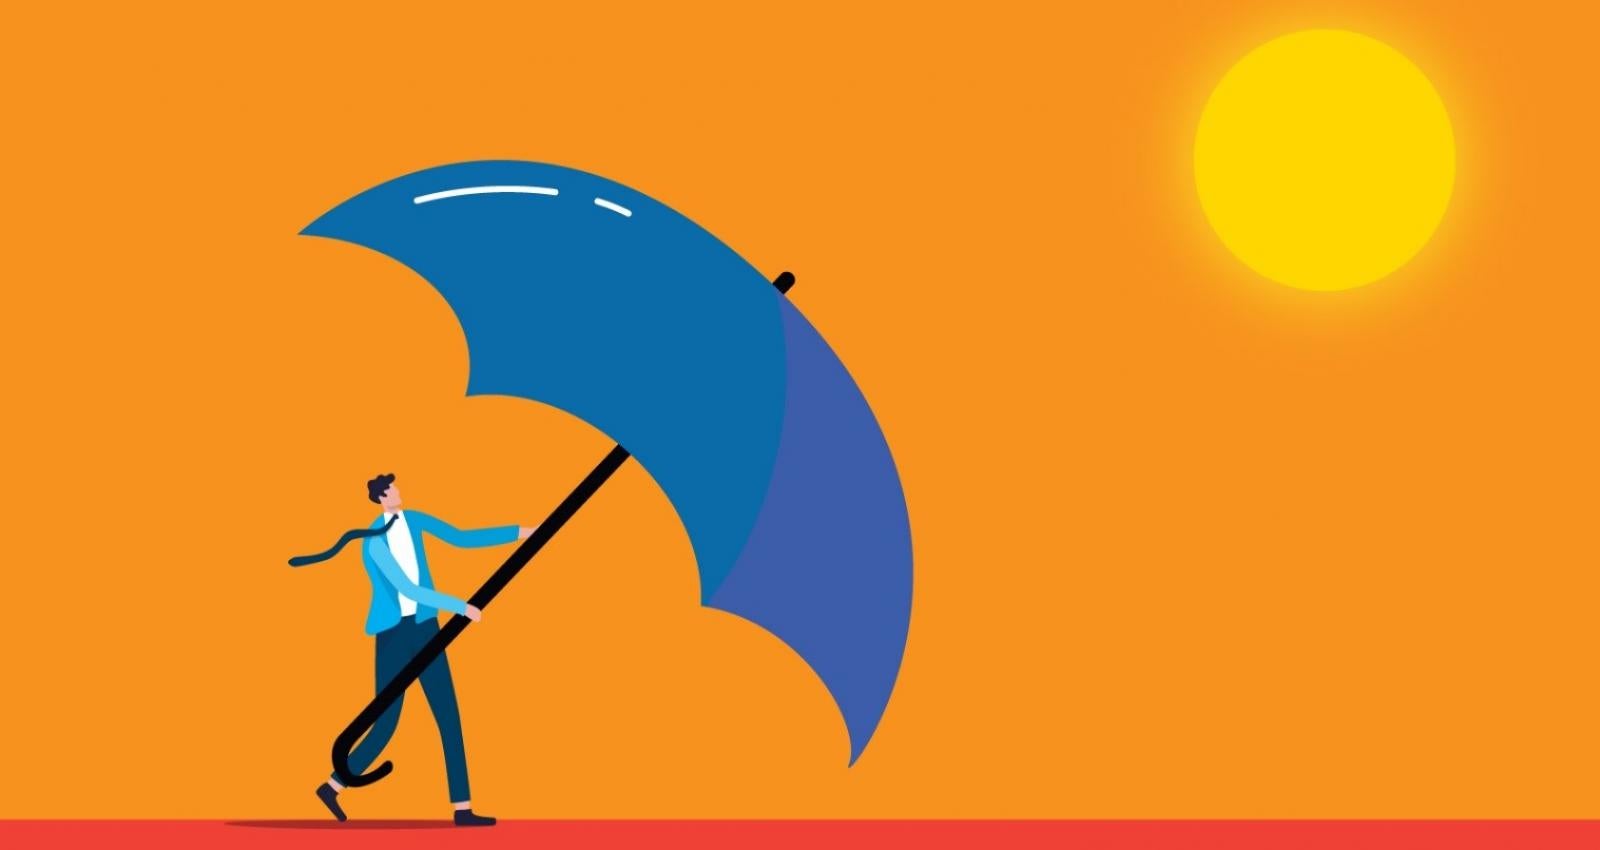 Image of man holding an umbrella to shield from the sun. Adapted from shutterstock